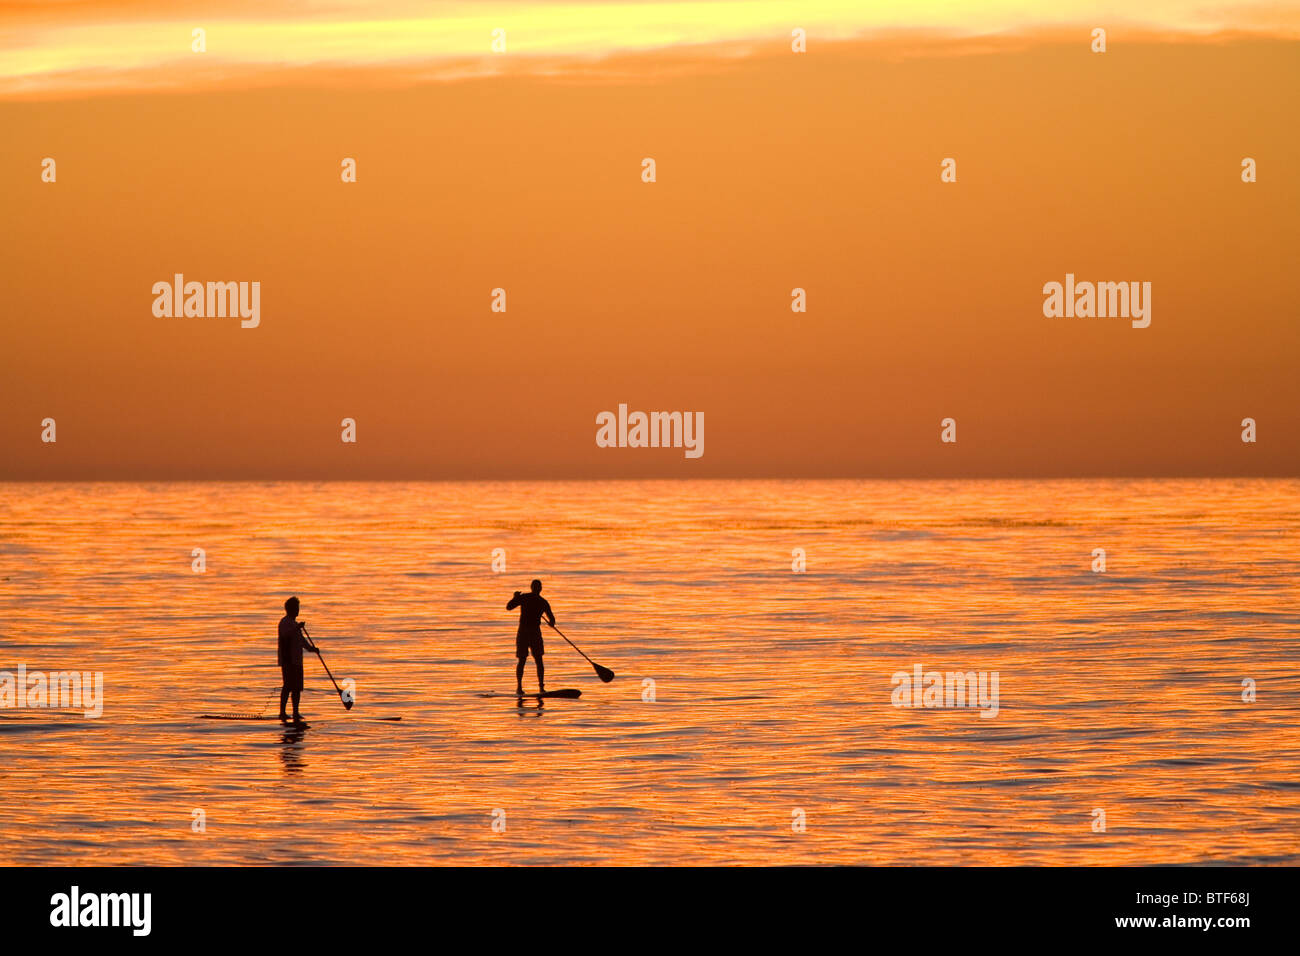 Two Stand Up Paddle Boarders at Sunset, Windnsea Beach, La Jolla, California Stock Photo